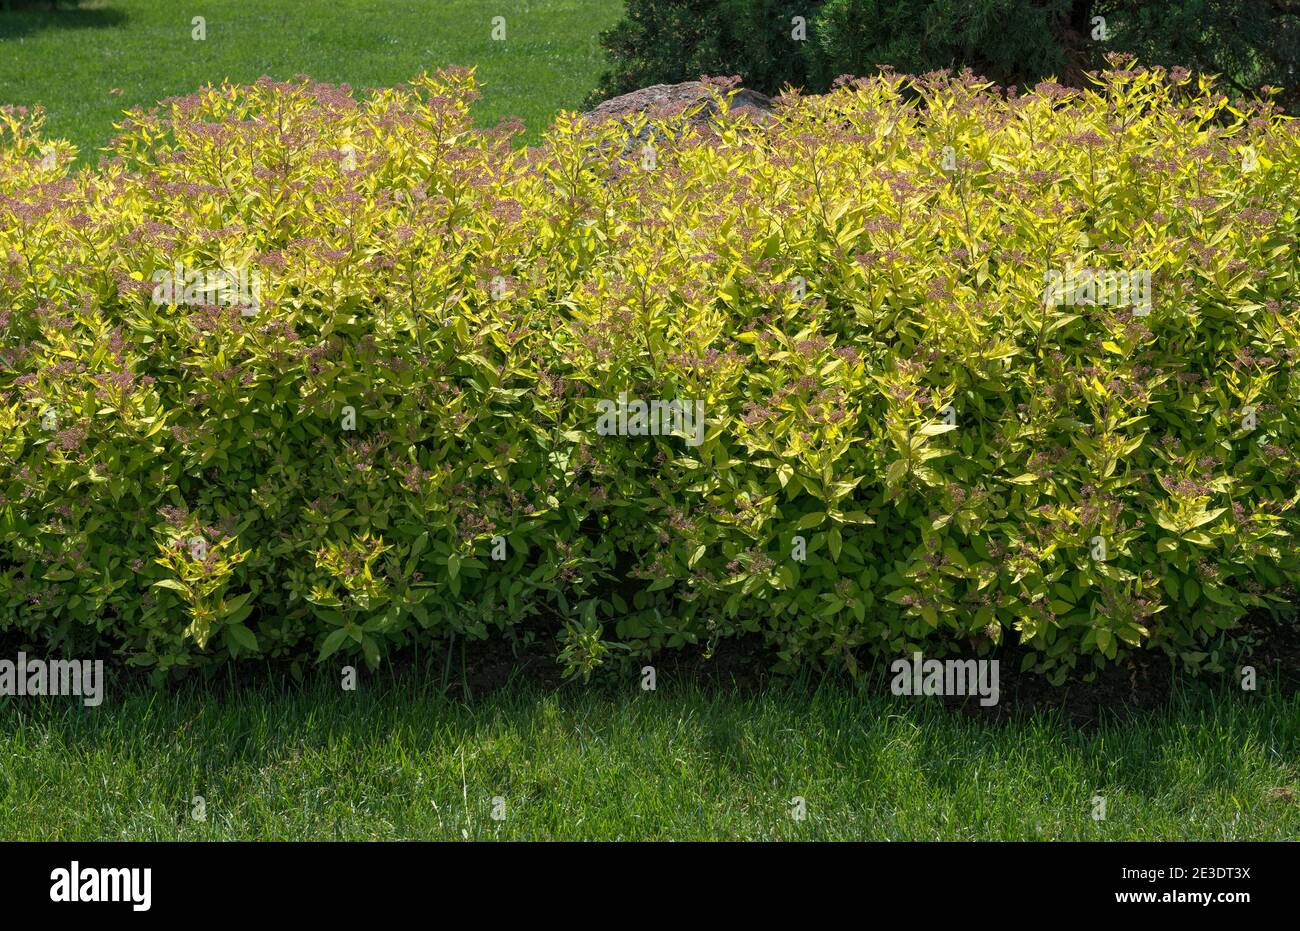 Close-up green hedge of Spiraea japonica that is just shedded its blossoms in garden. Stock Photo